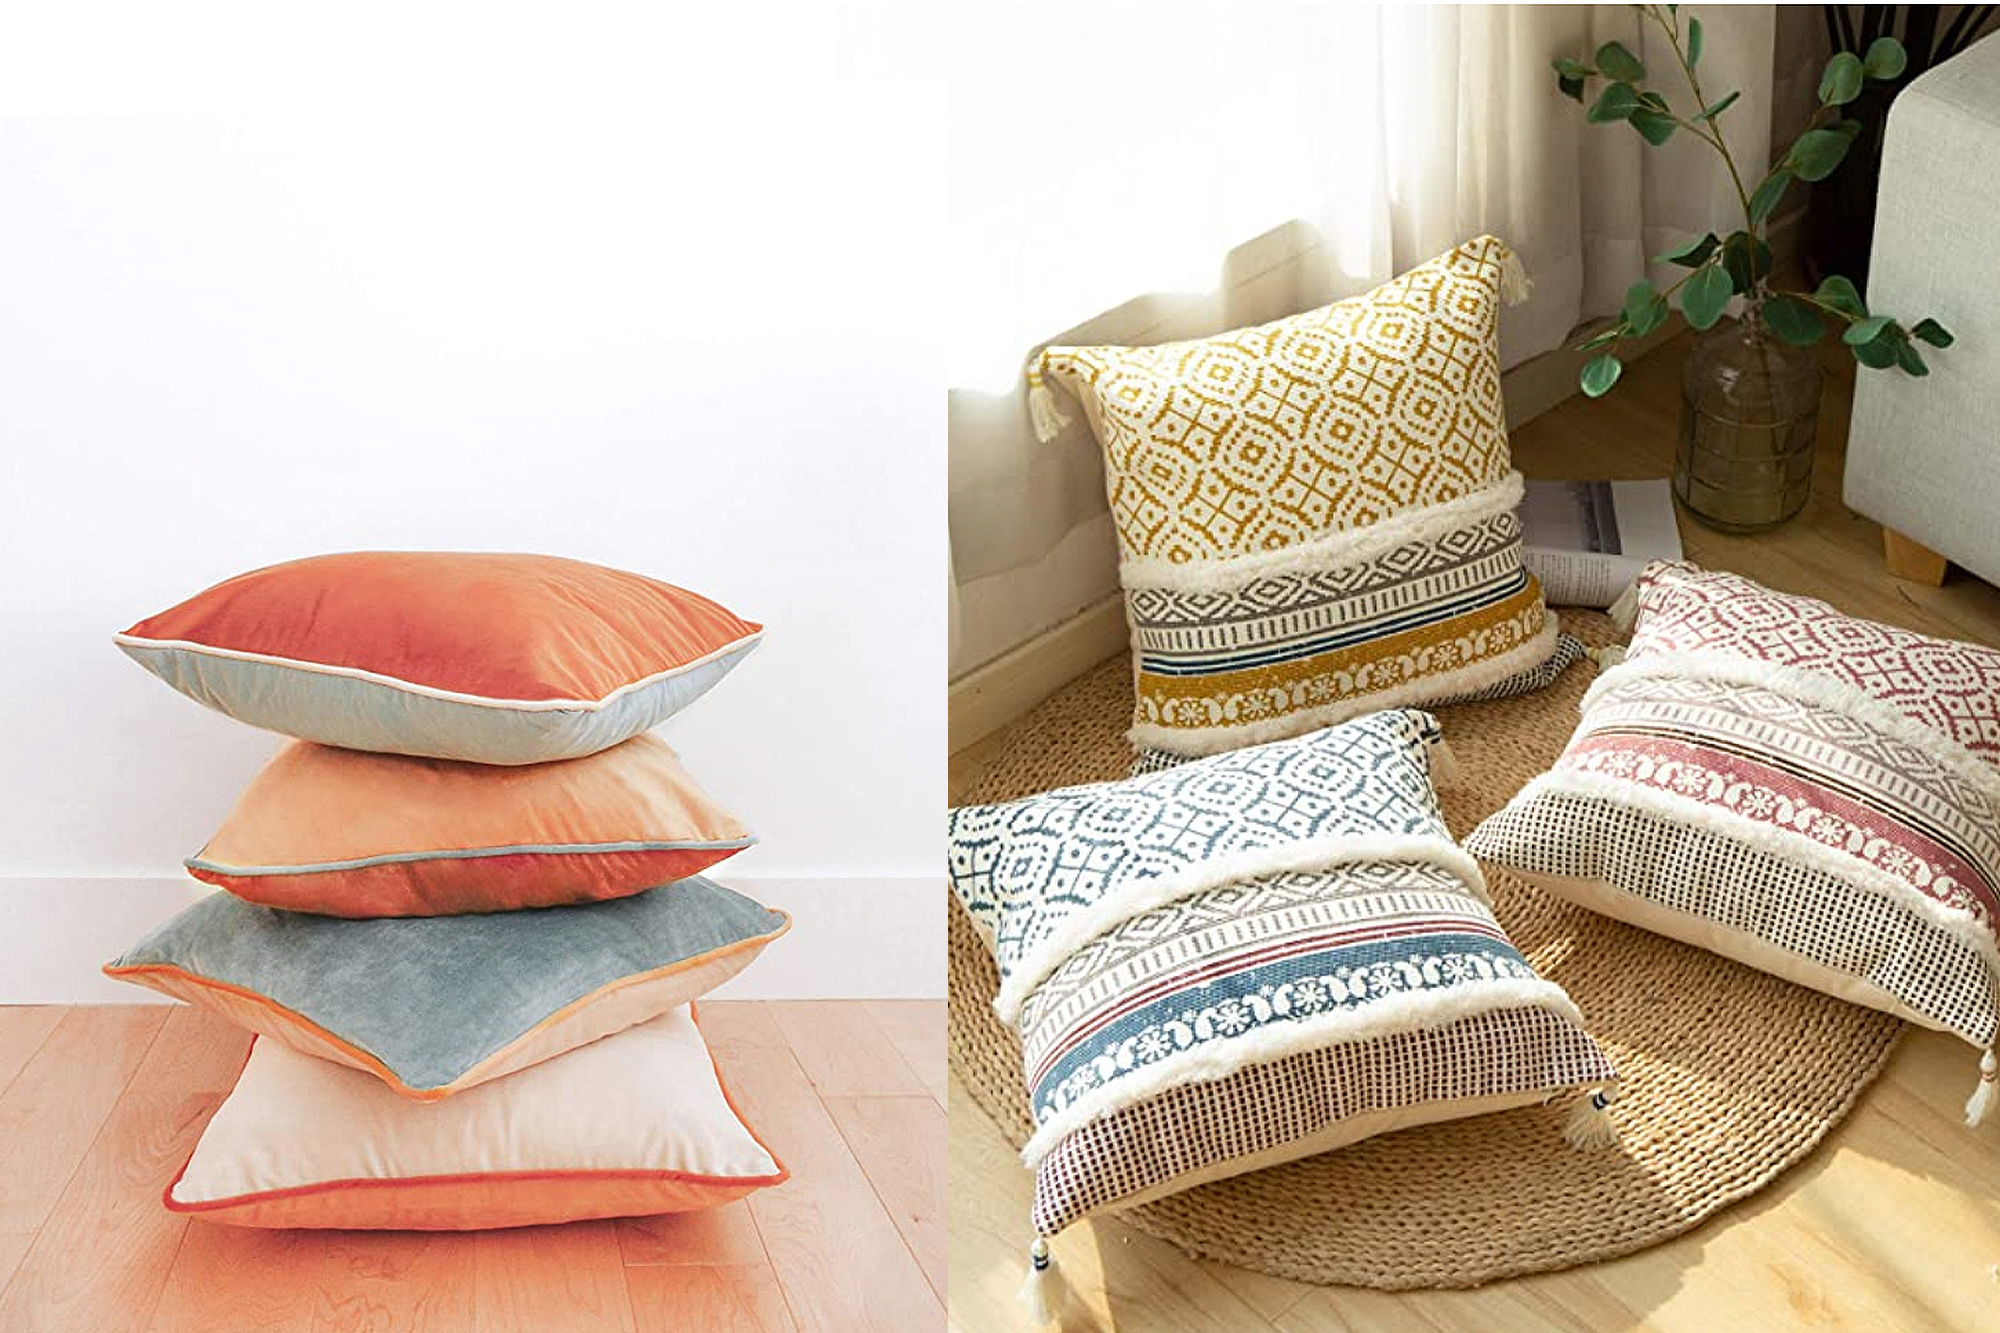 Why You Should Use Throw Pillow Covers - In My Own Style